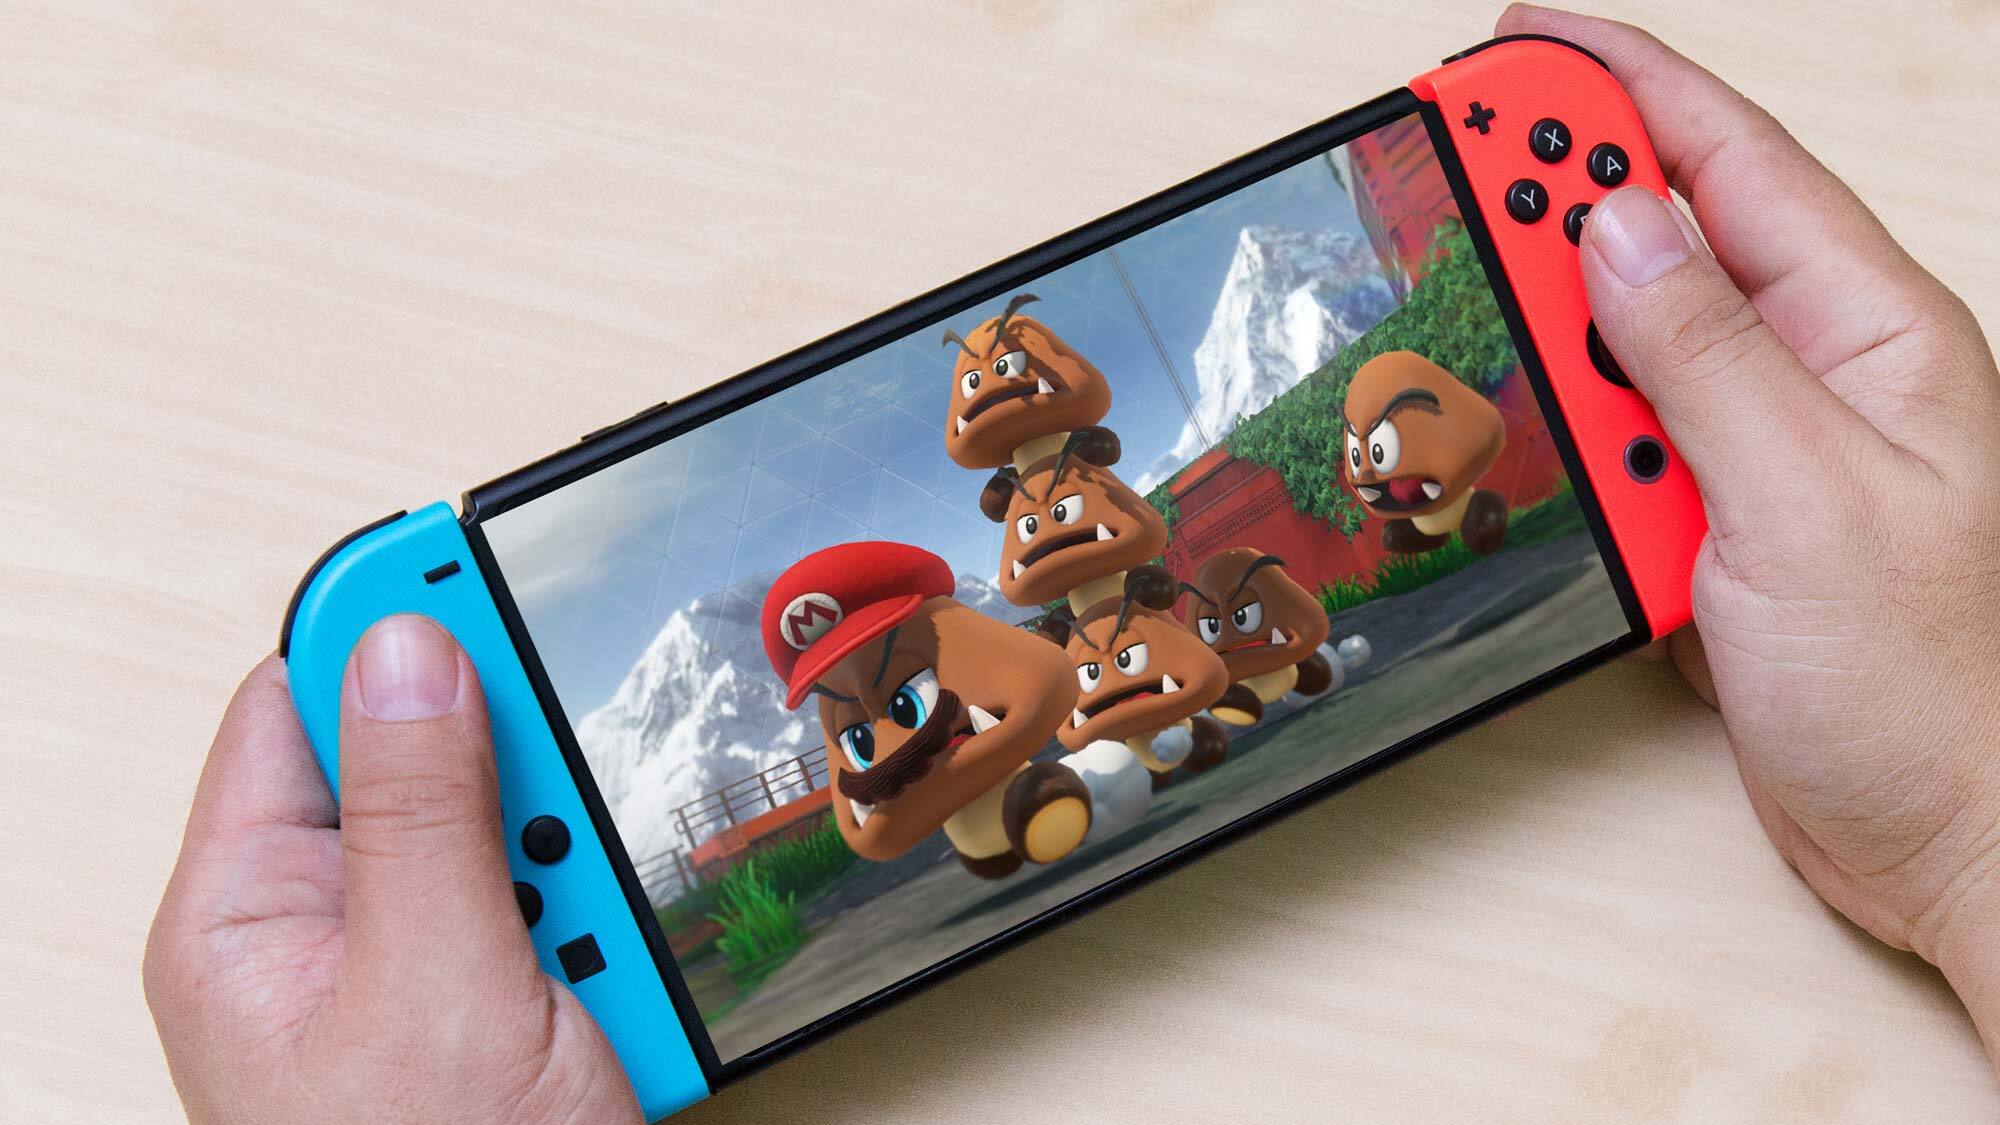 All Nintendo Switch Games To Play Online Without Subscription